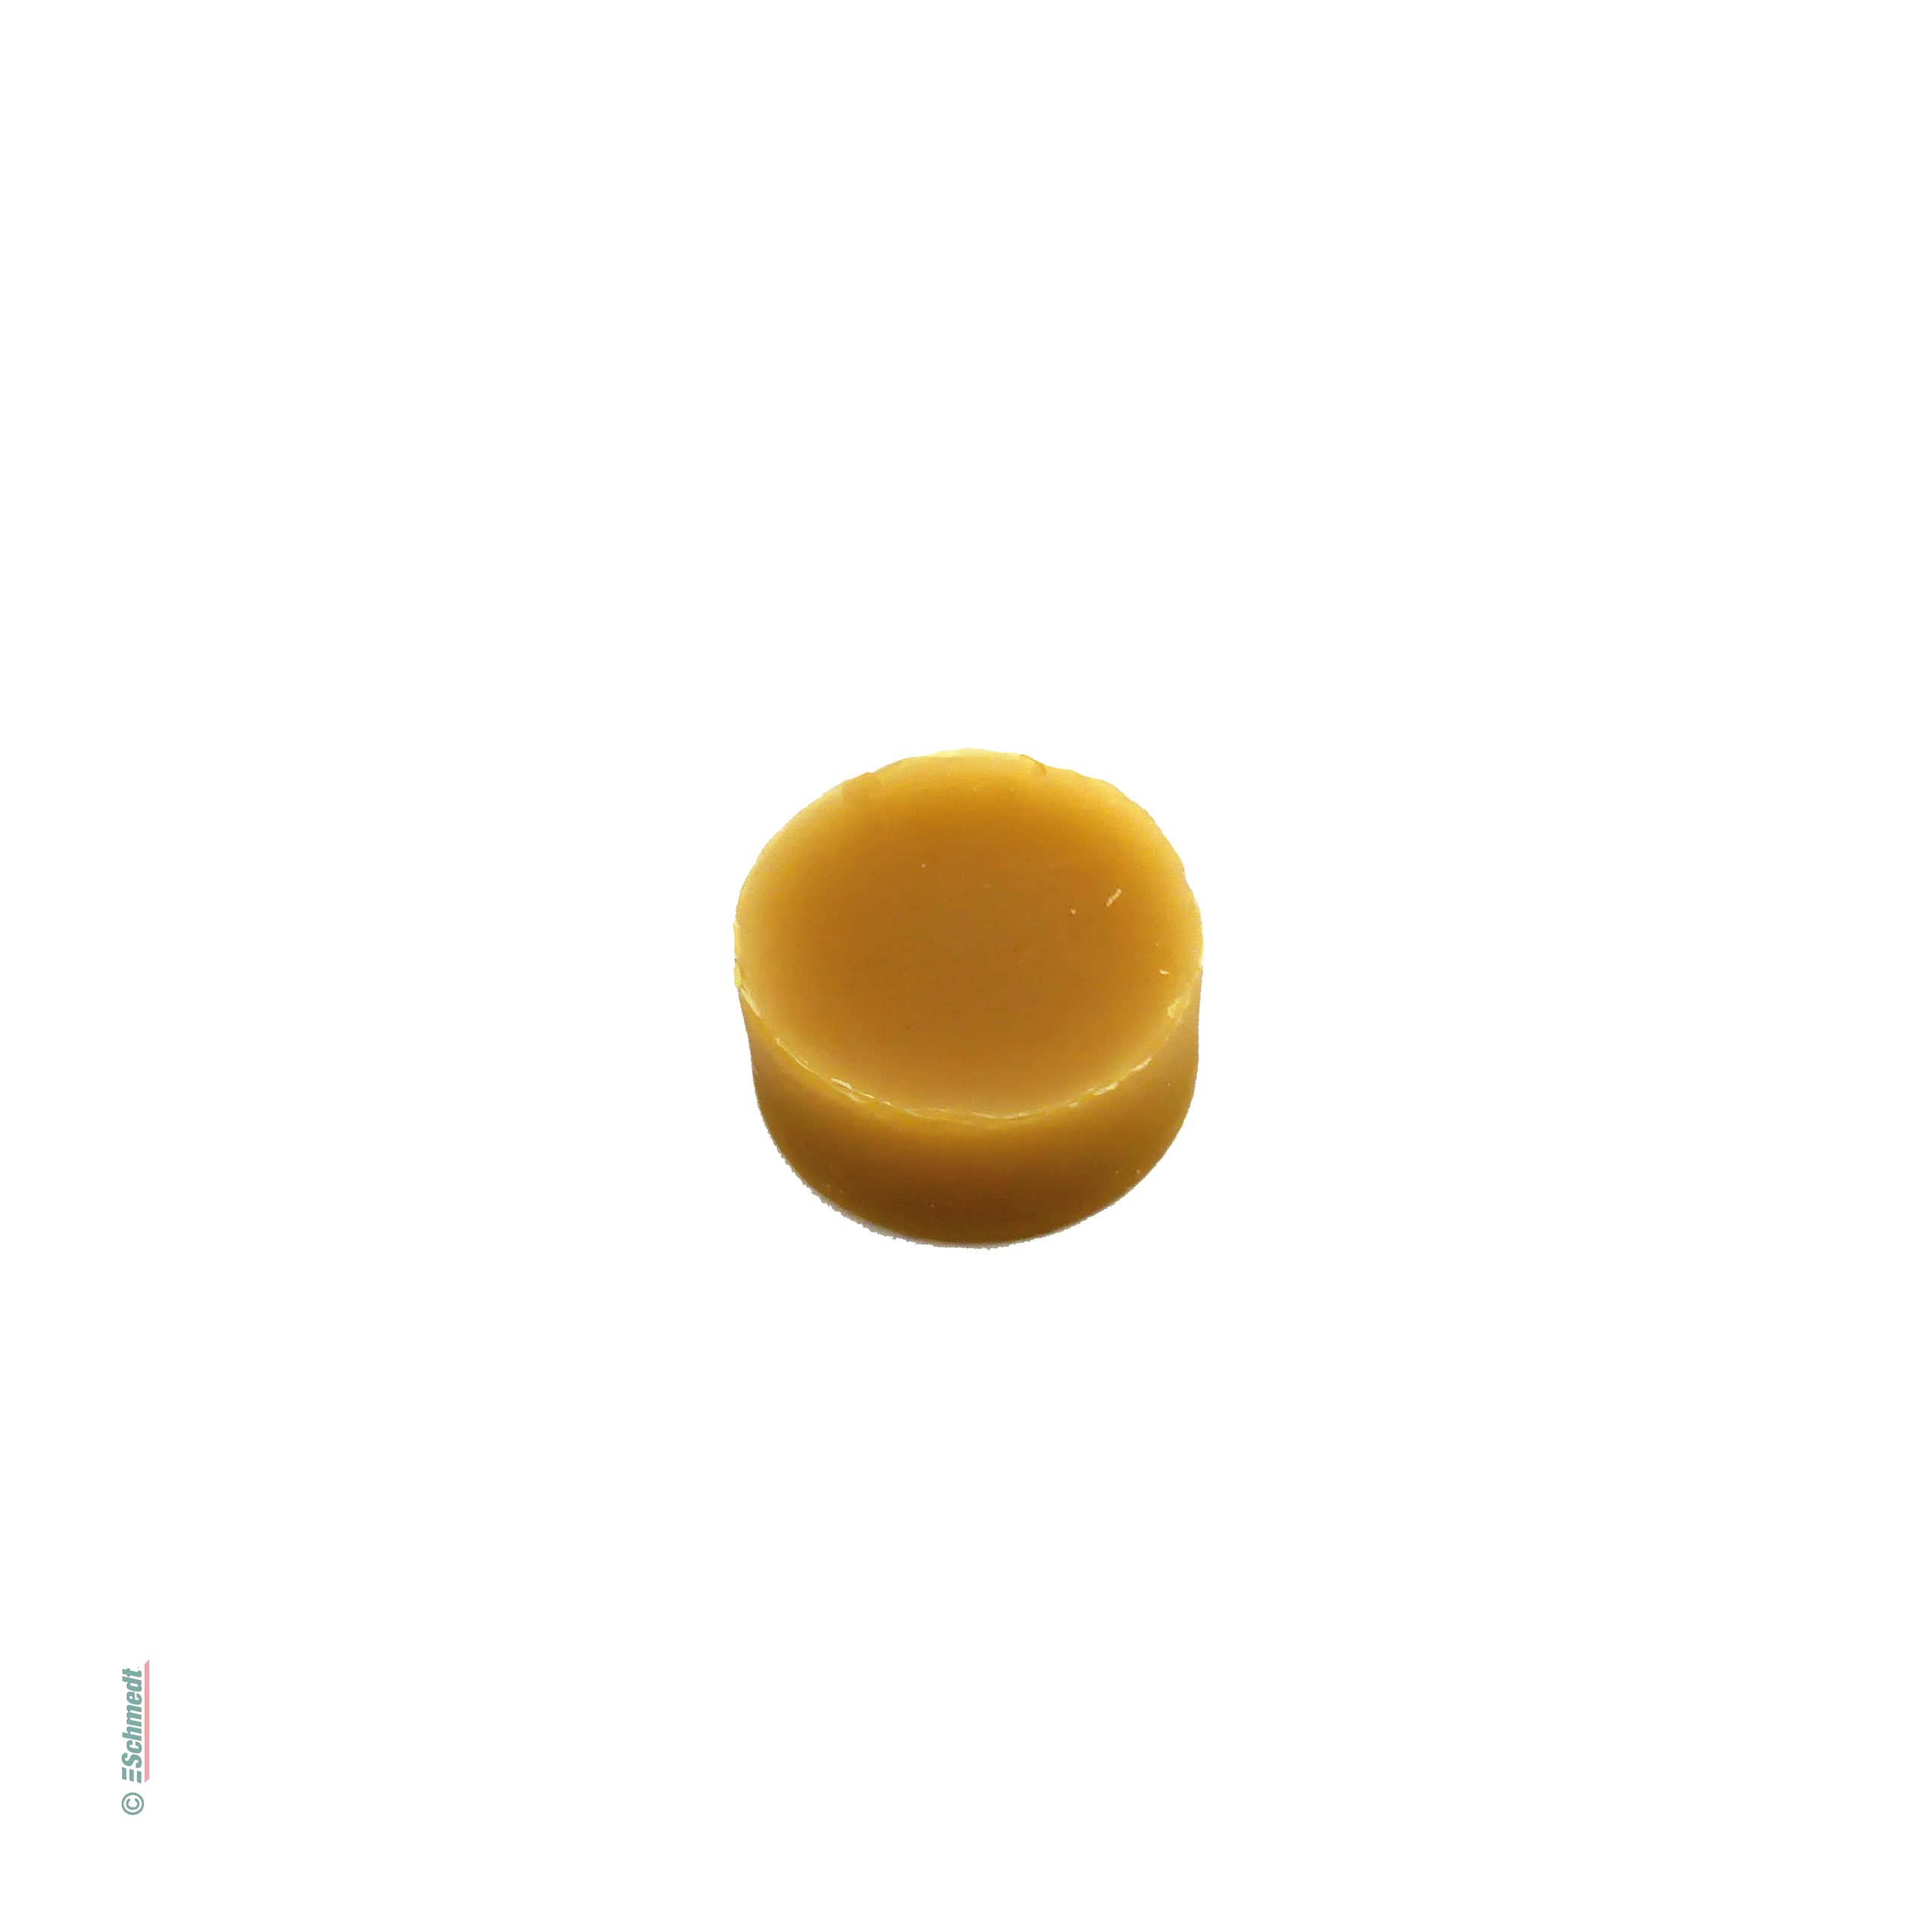 Beeswax - Contents Piece / approx. 12 - 15 g - for waxing the sewing thread for easier sewing...